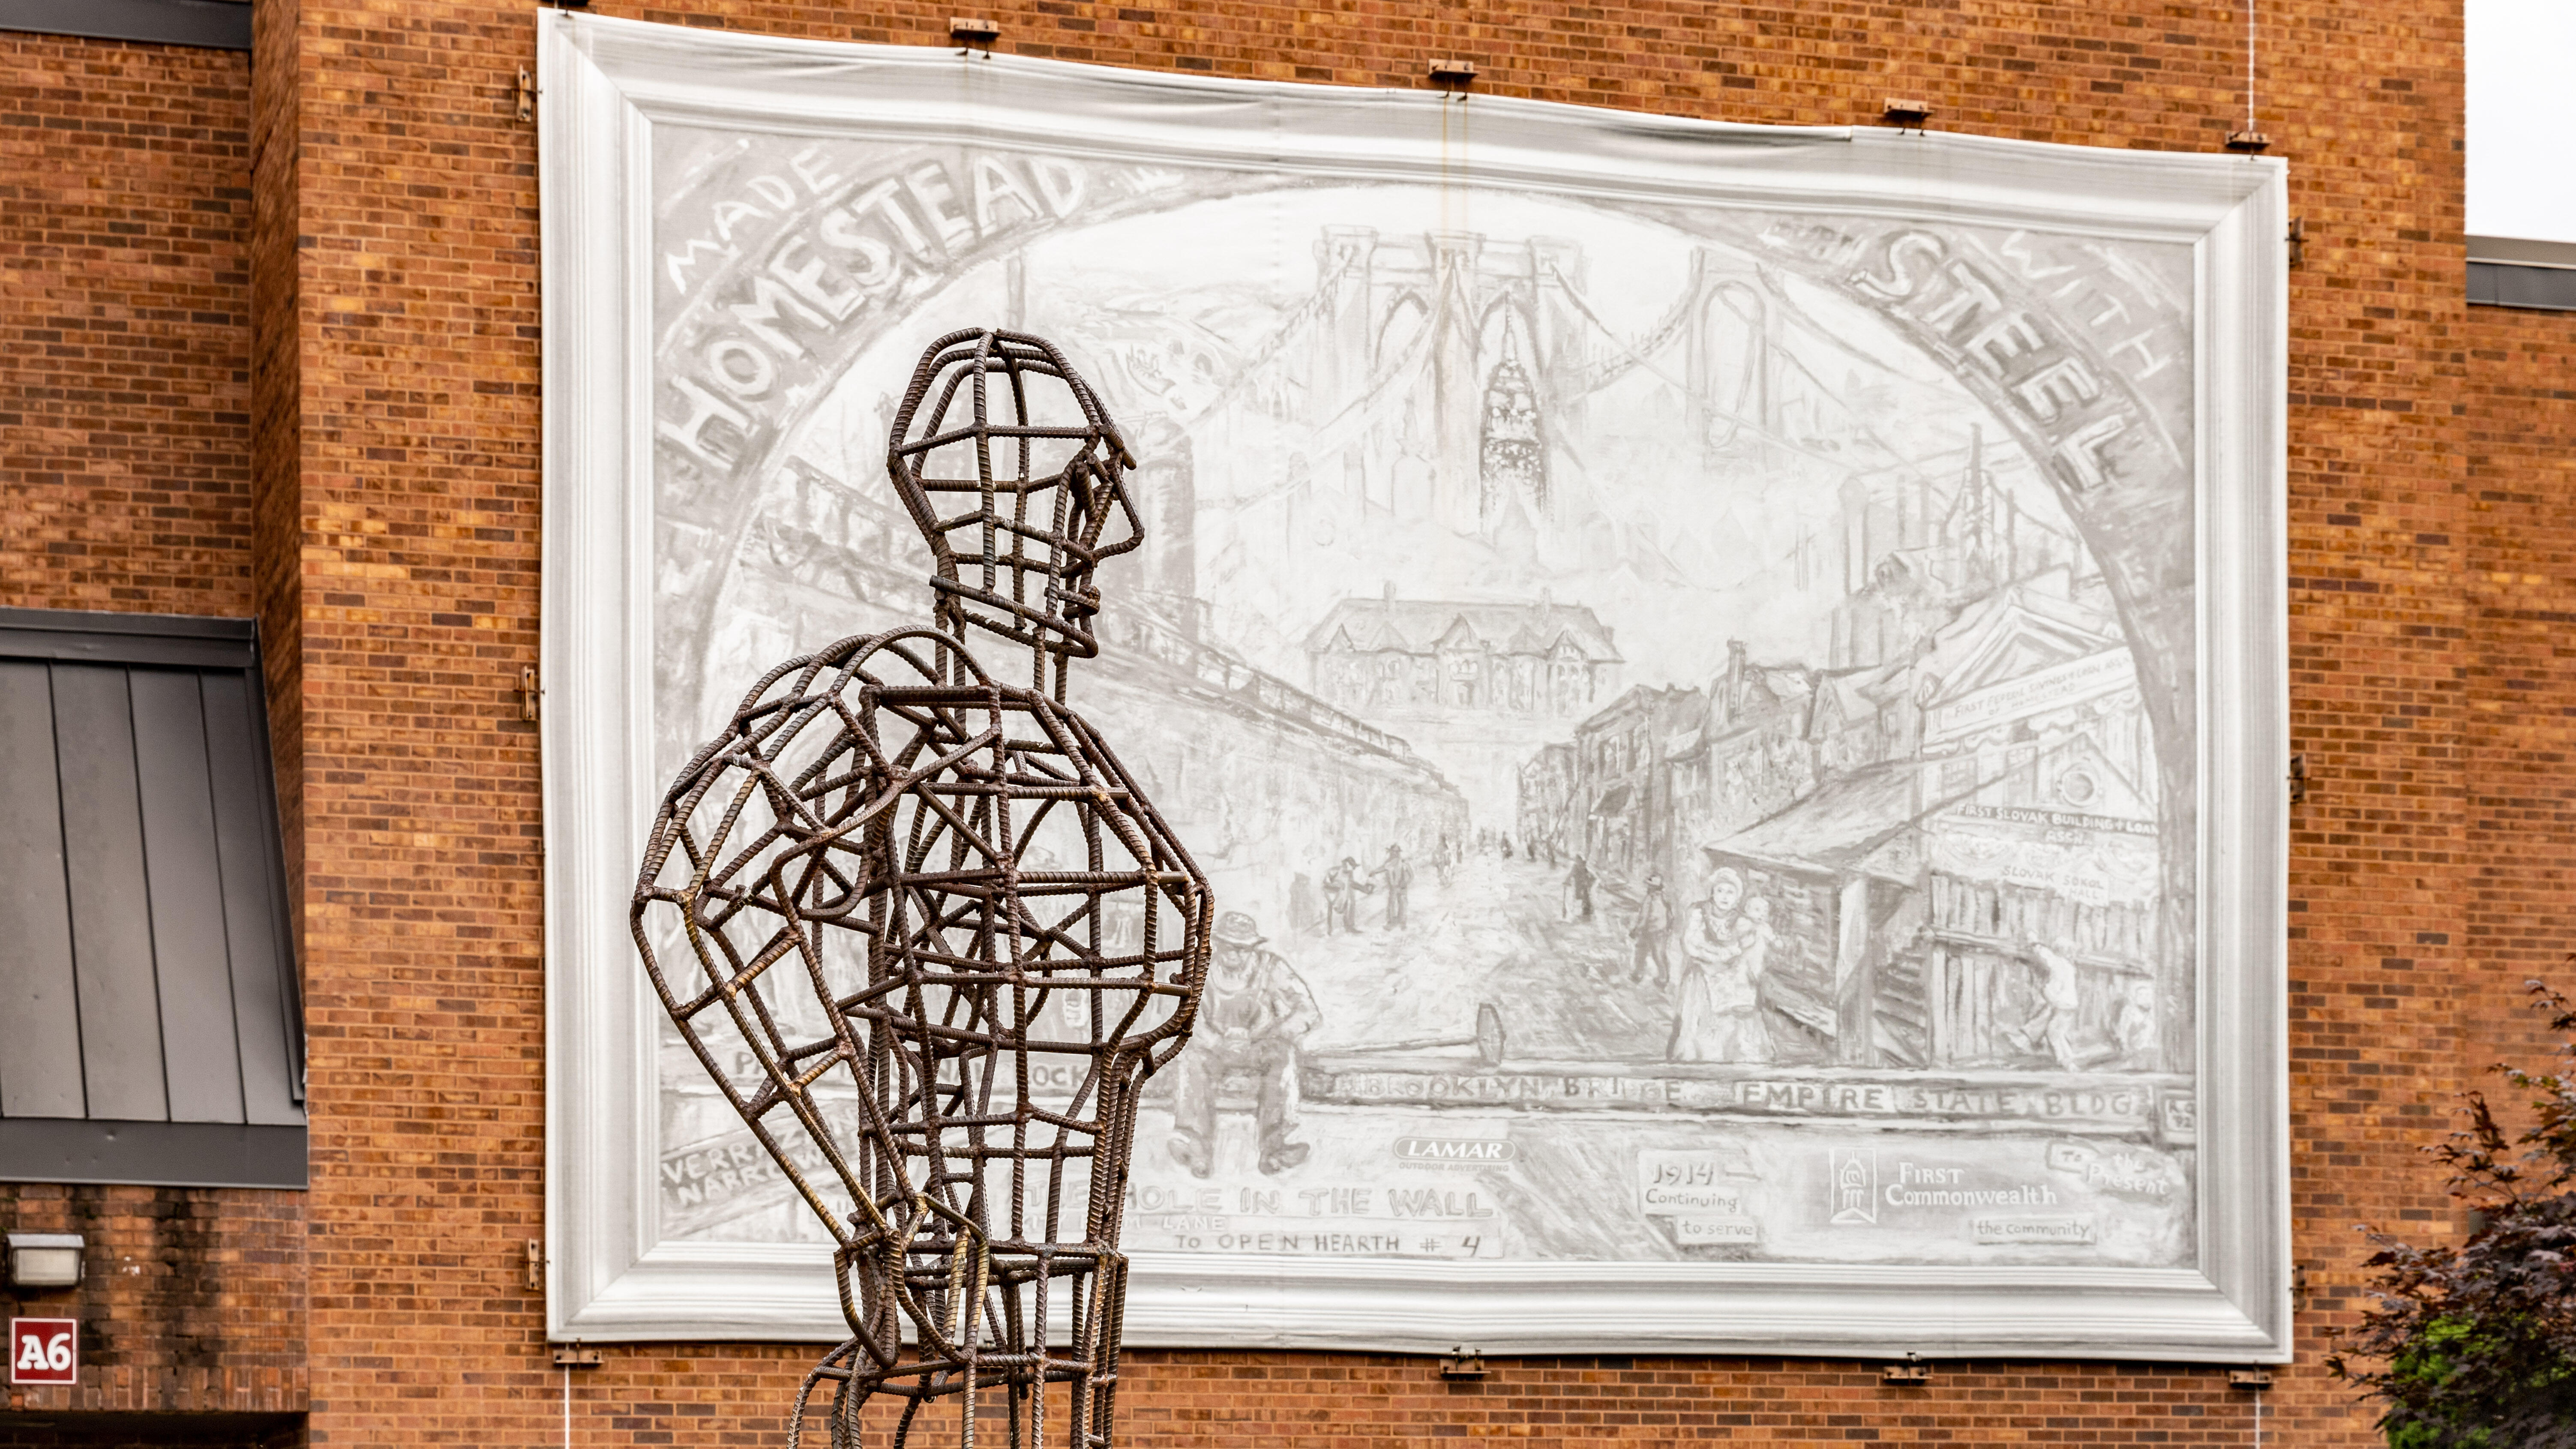 A wire frame sculpture of a person stands in front of an engraved relief on the side of the Steel Valley Middle School/High School building. 